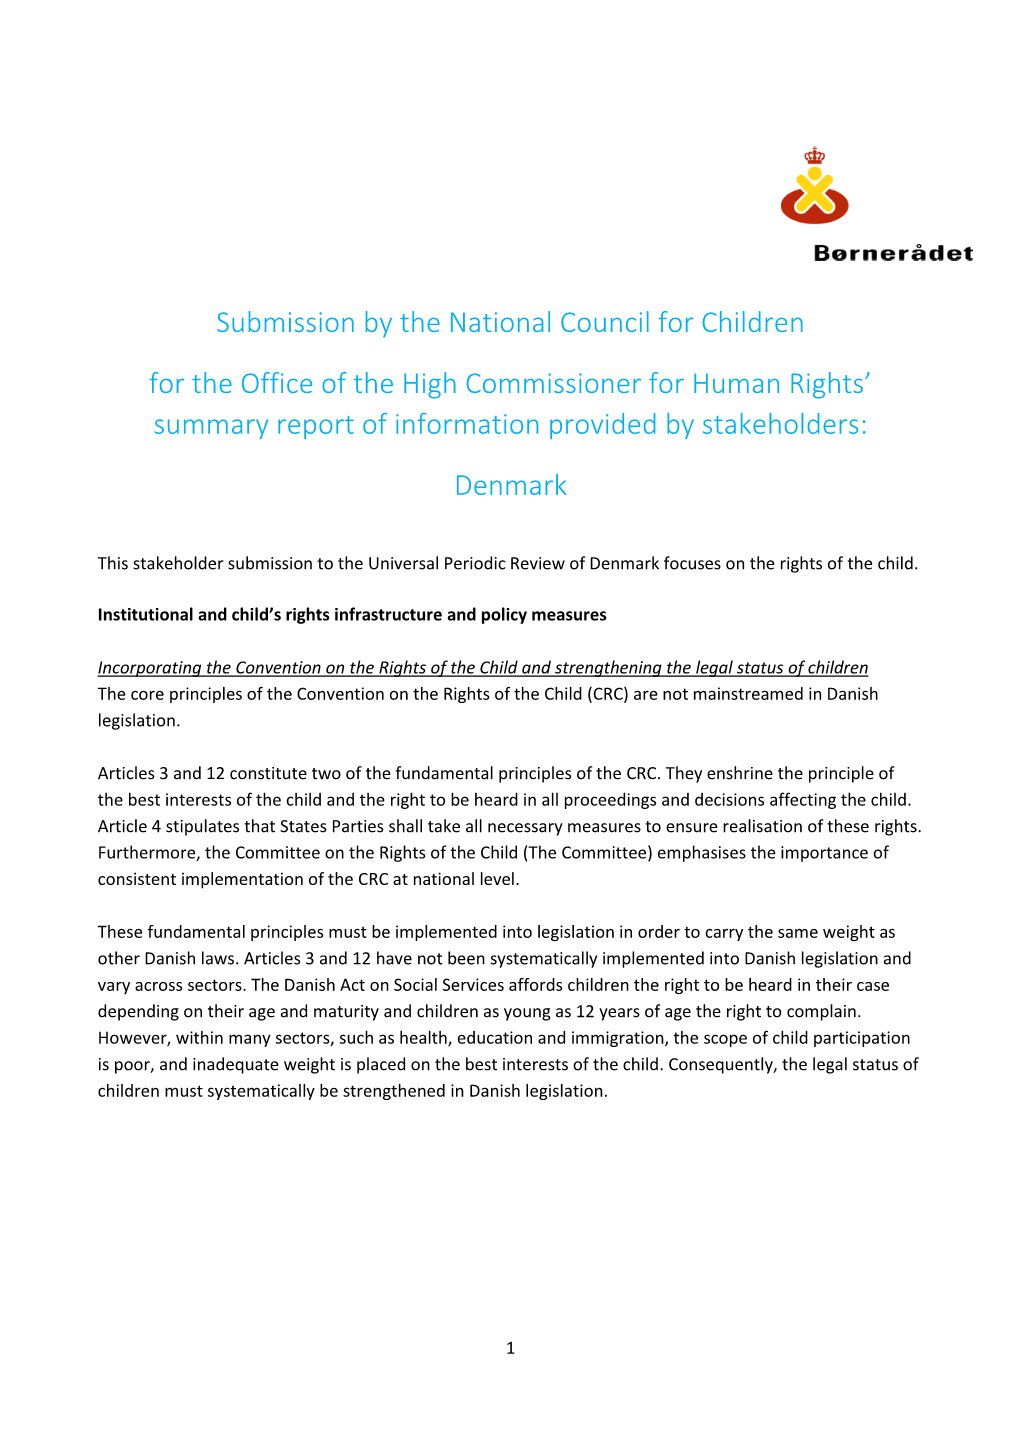 Submission by the National Council for Children for the Office of the High Commissioner for Human Rights' Summary Report of In